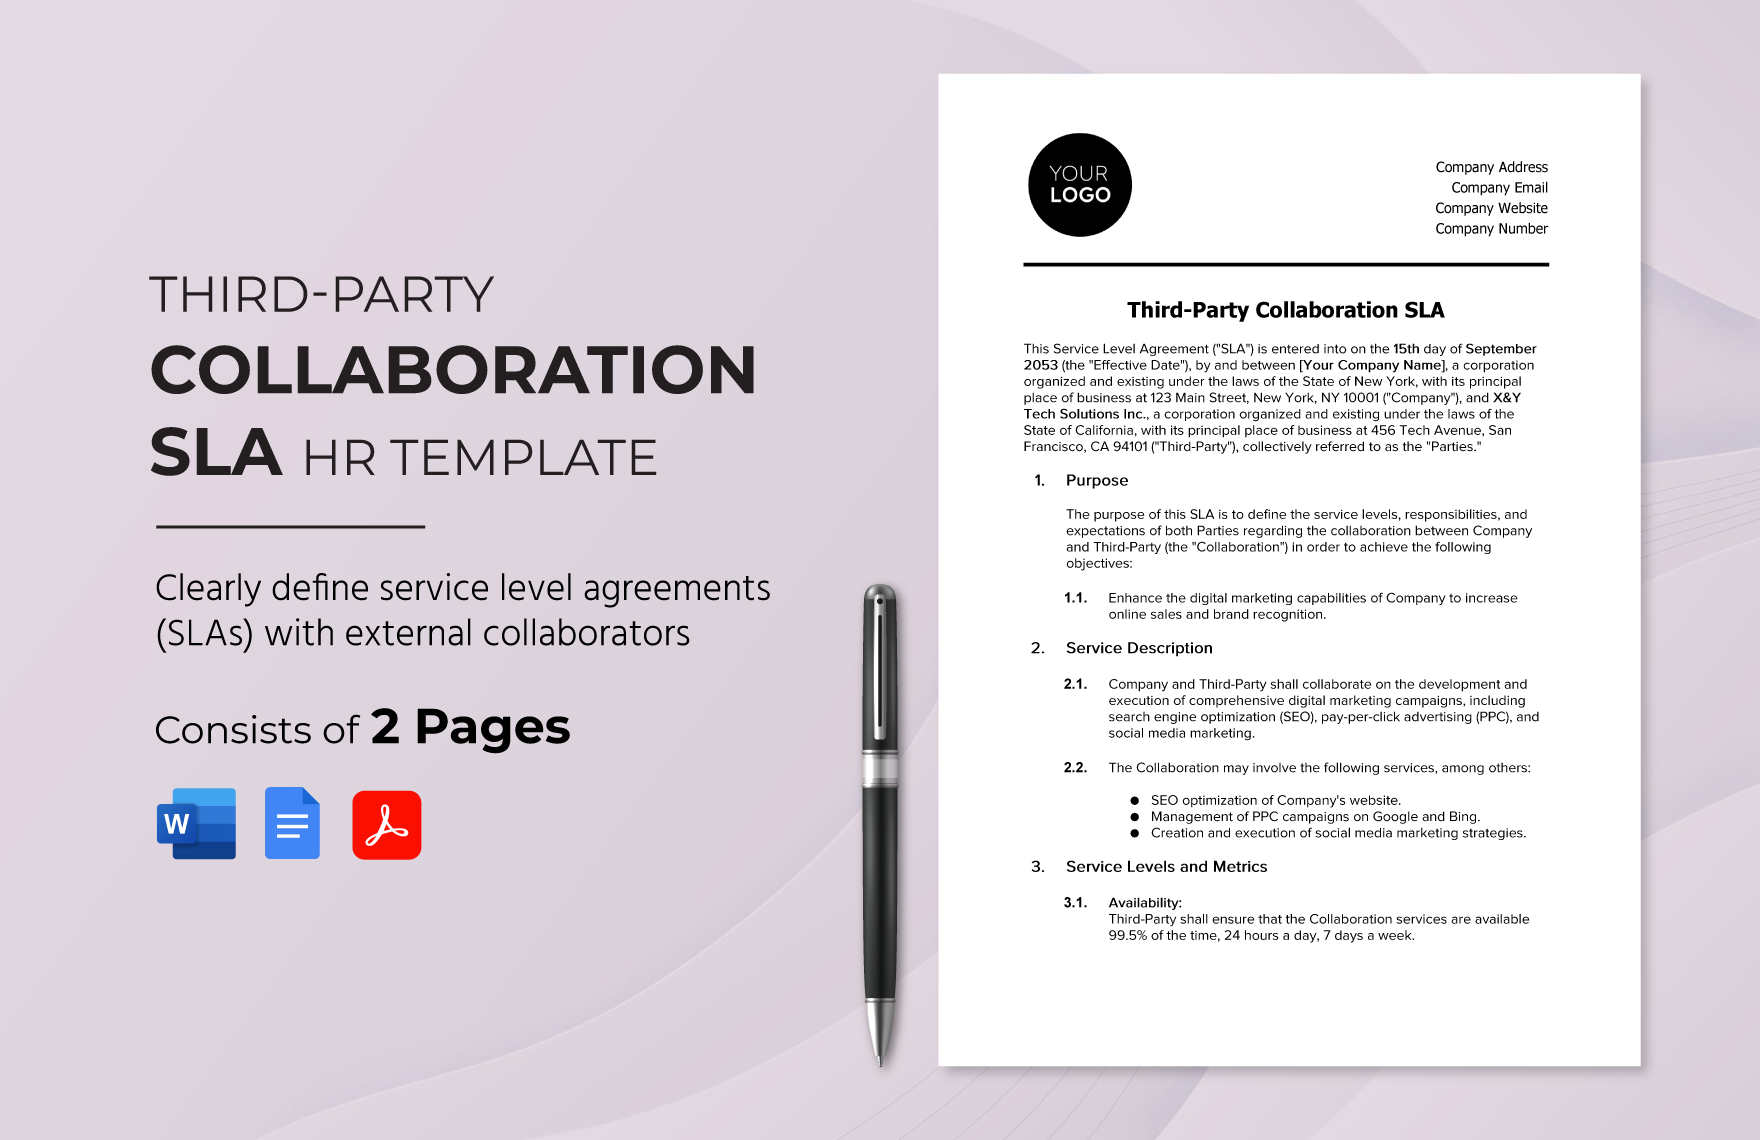 third-party-collaboration-sla-hr-template